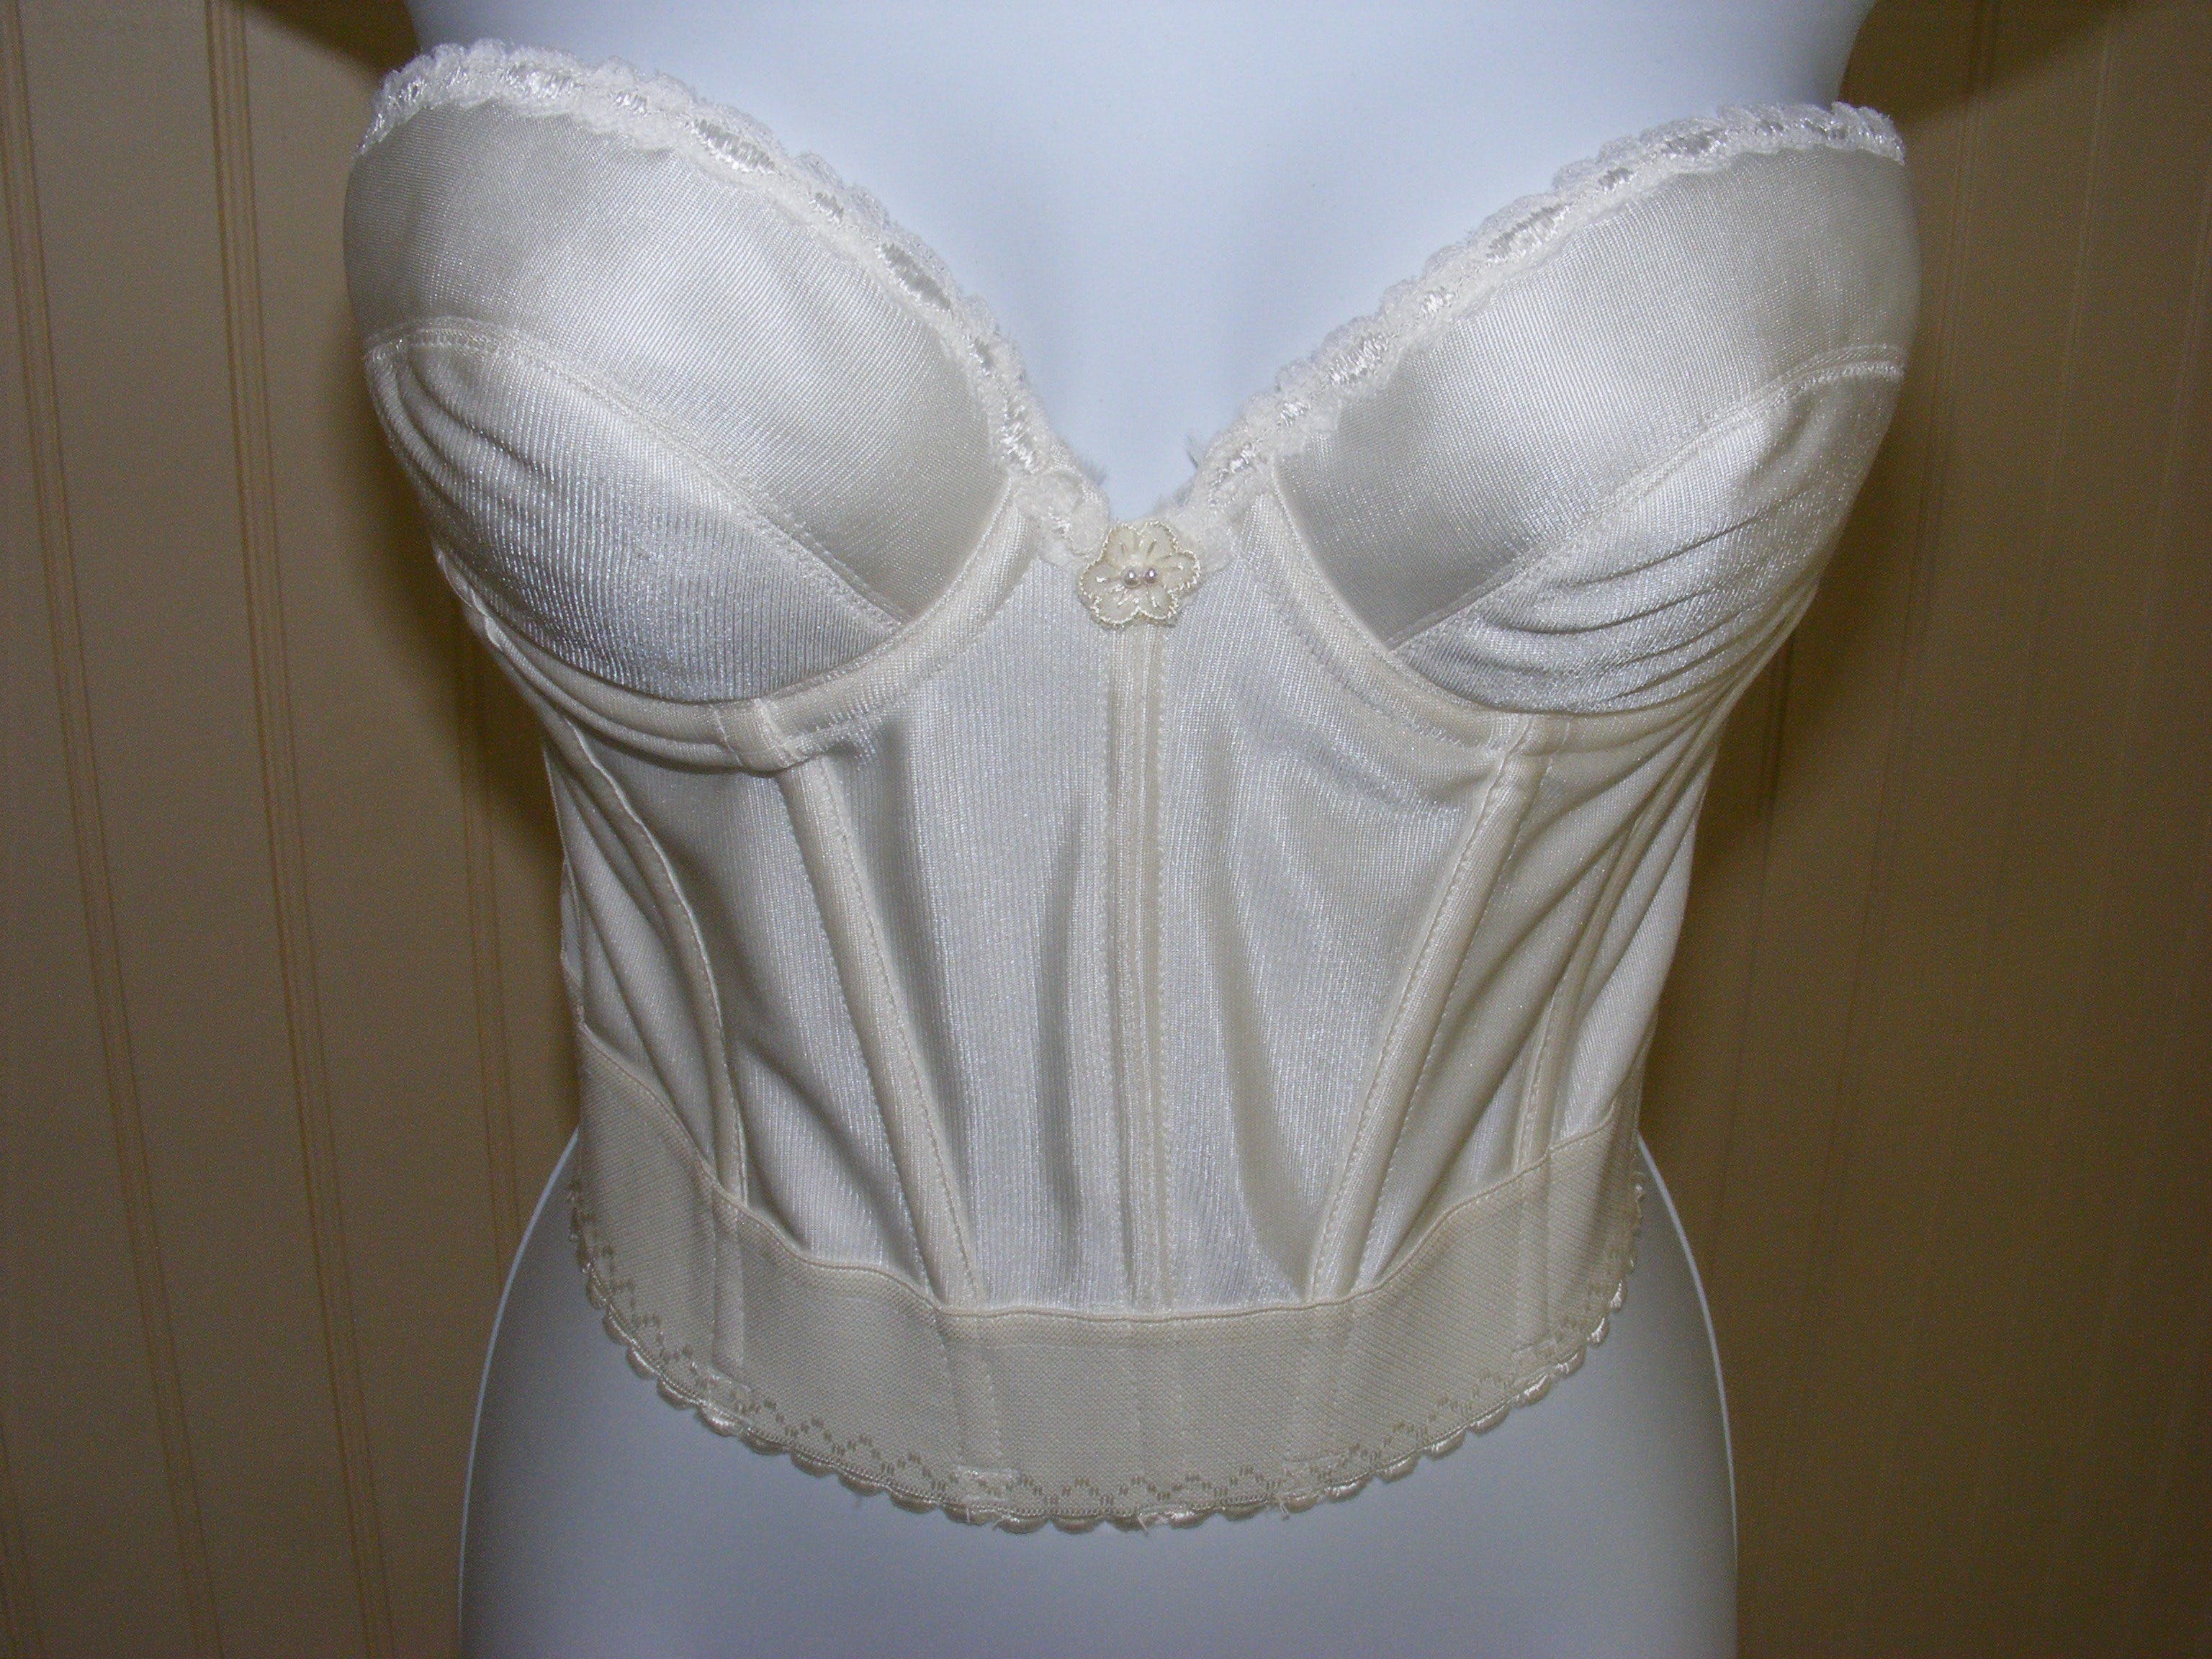 Vintage 80's 36 A White Bustier Bra by Carnival